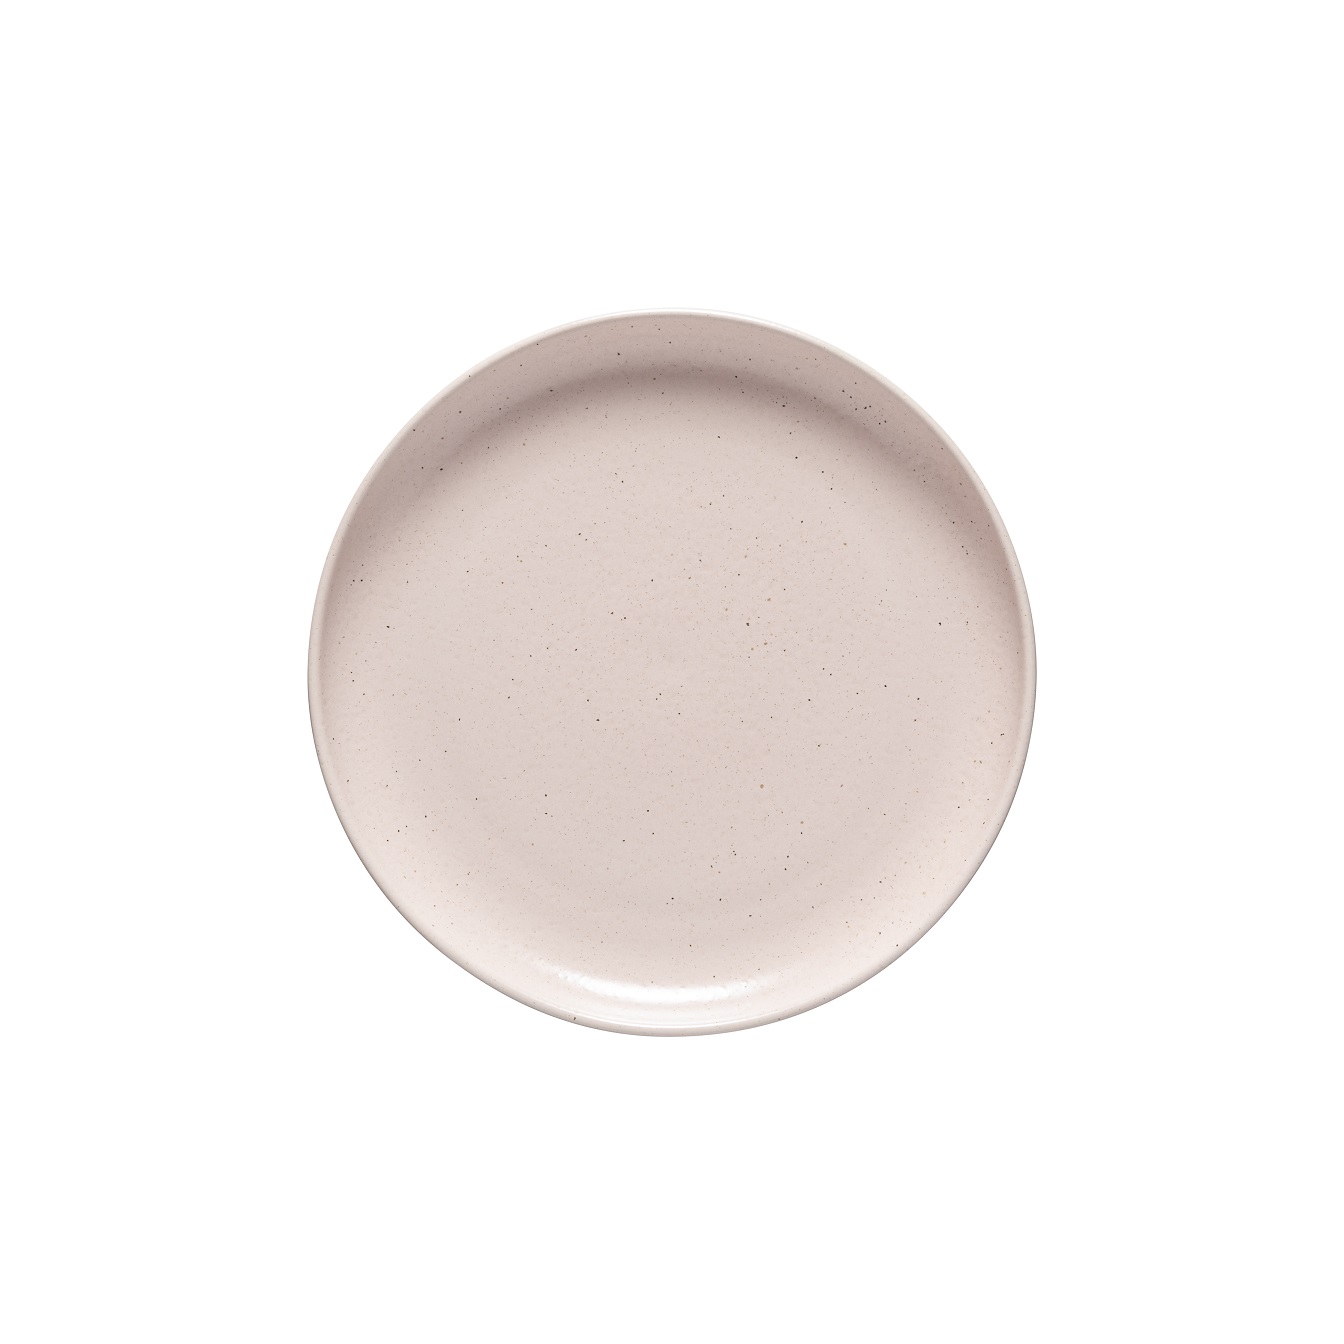 Pacifica Marshmallow Salad Plate 22.8cm Gift